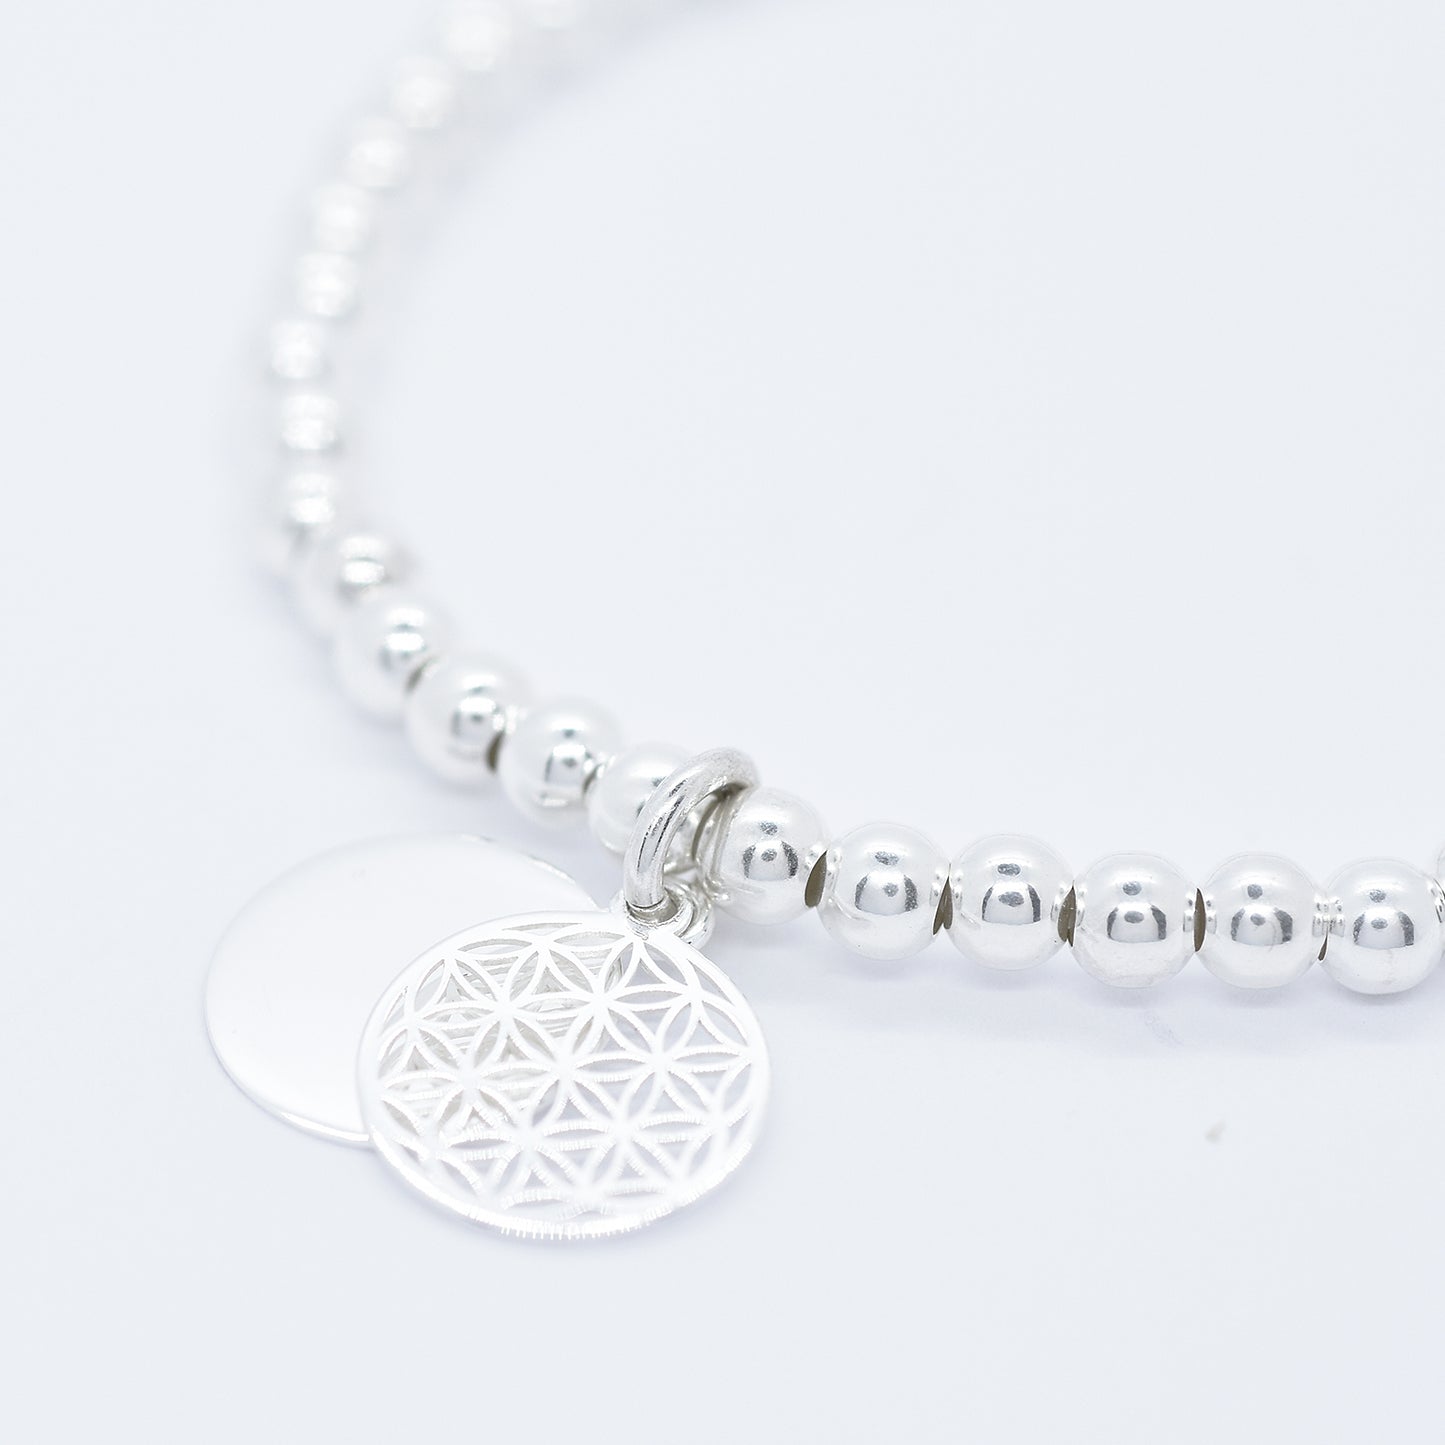 Bracelet personalized with engraved platelet &amp; flower of life / 925 sterling silver